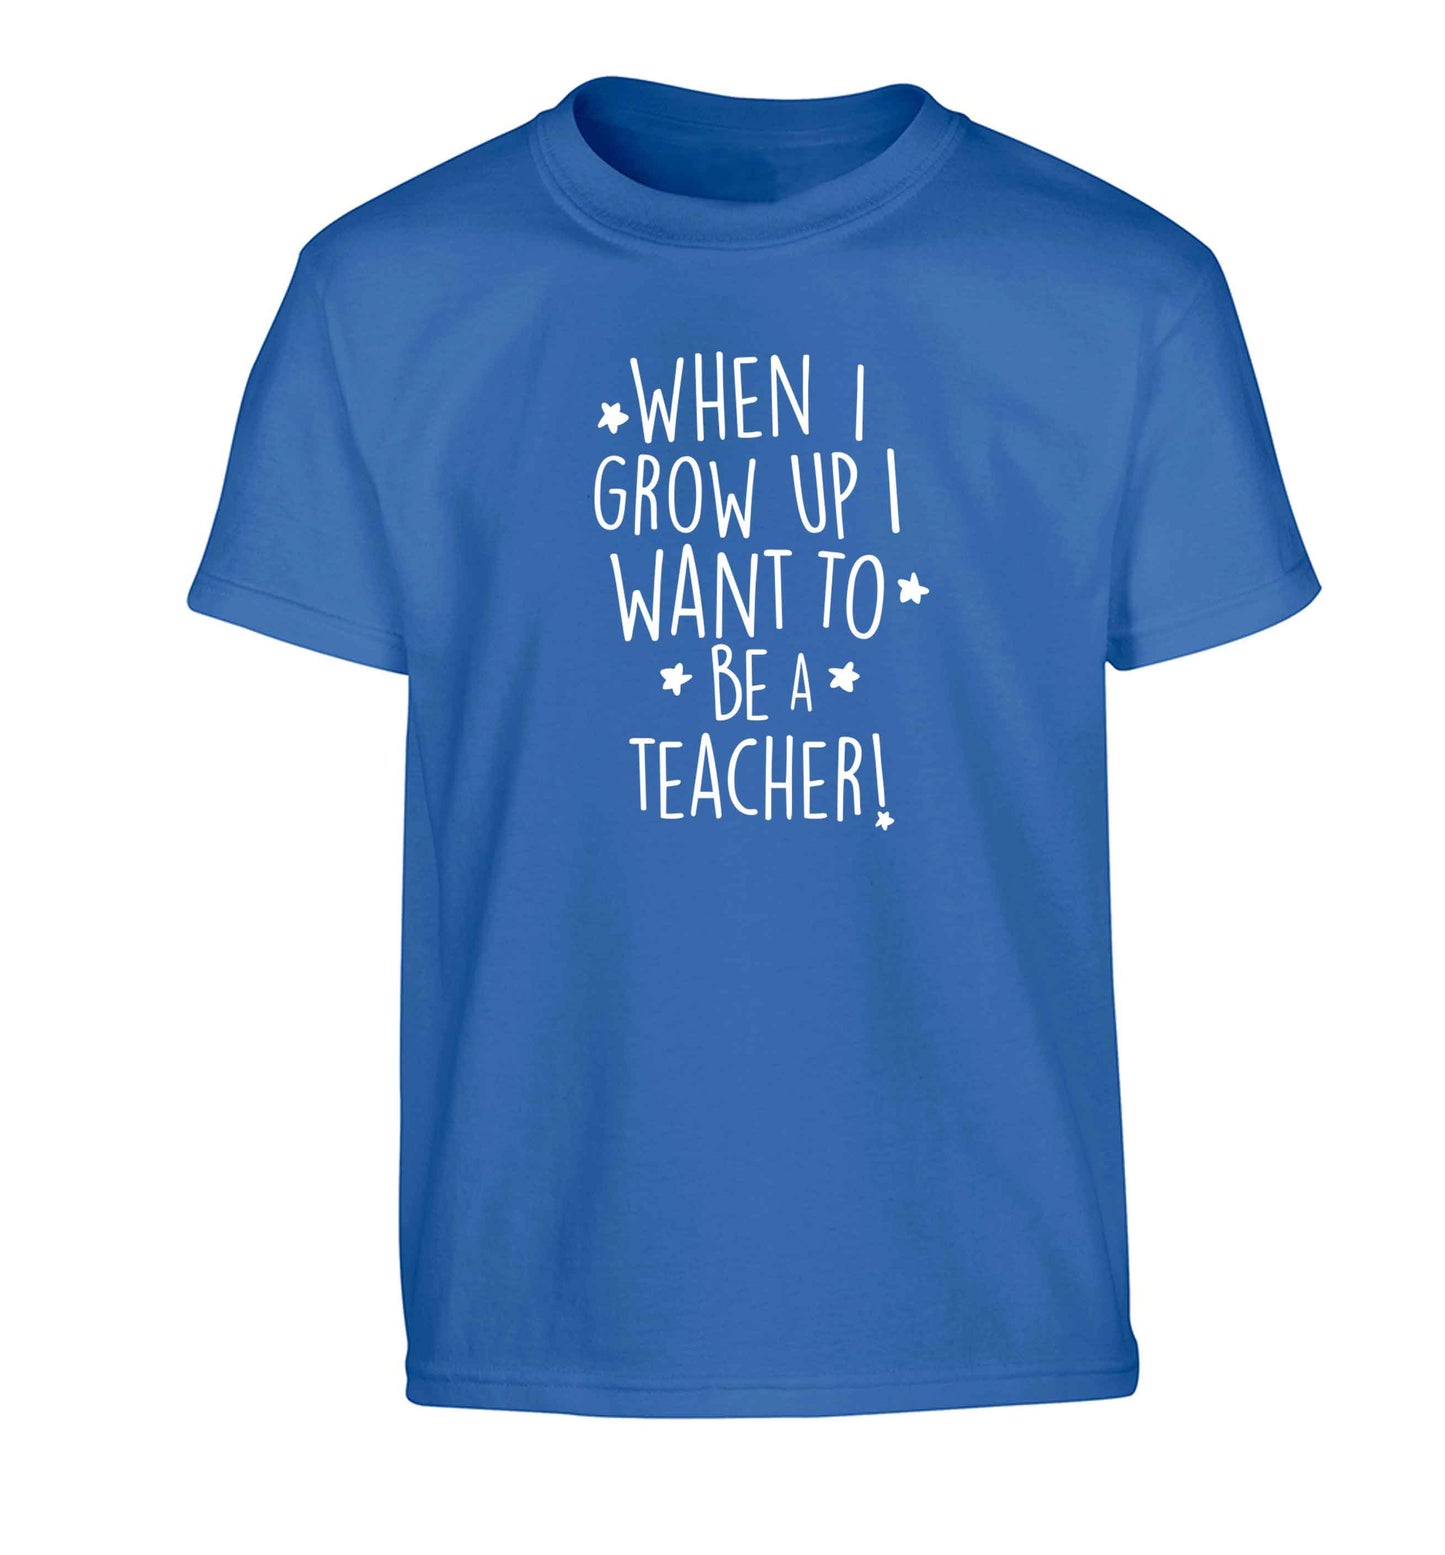 When I grow up I want to be a teacher Children's blue Tshirt 12-13 Years